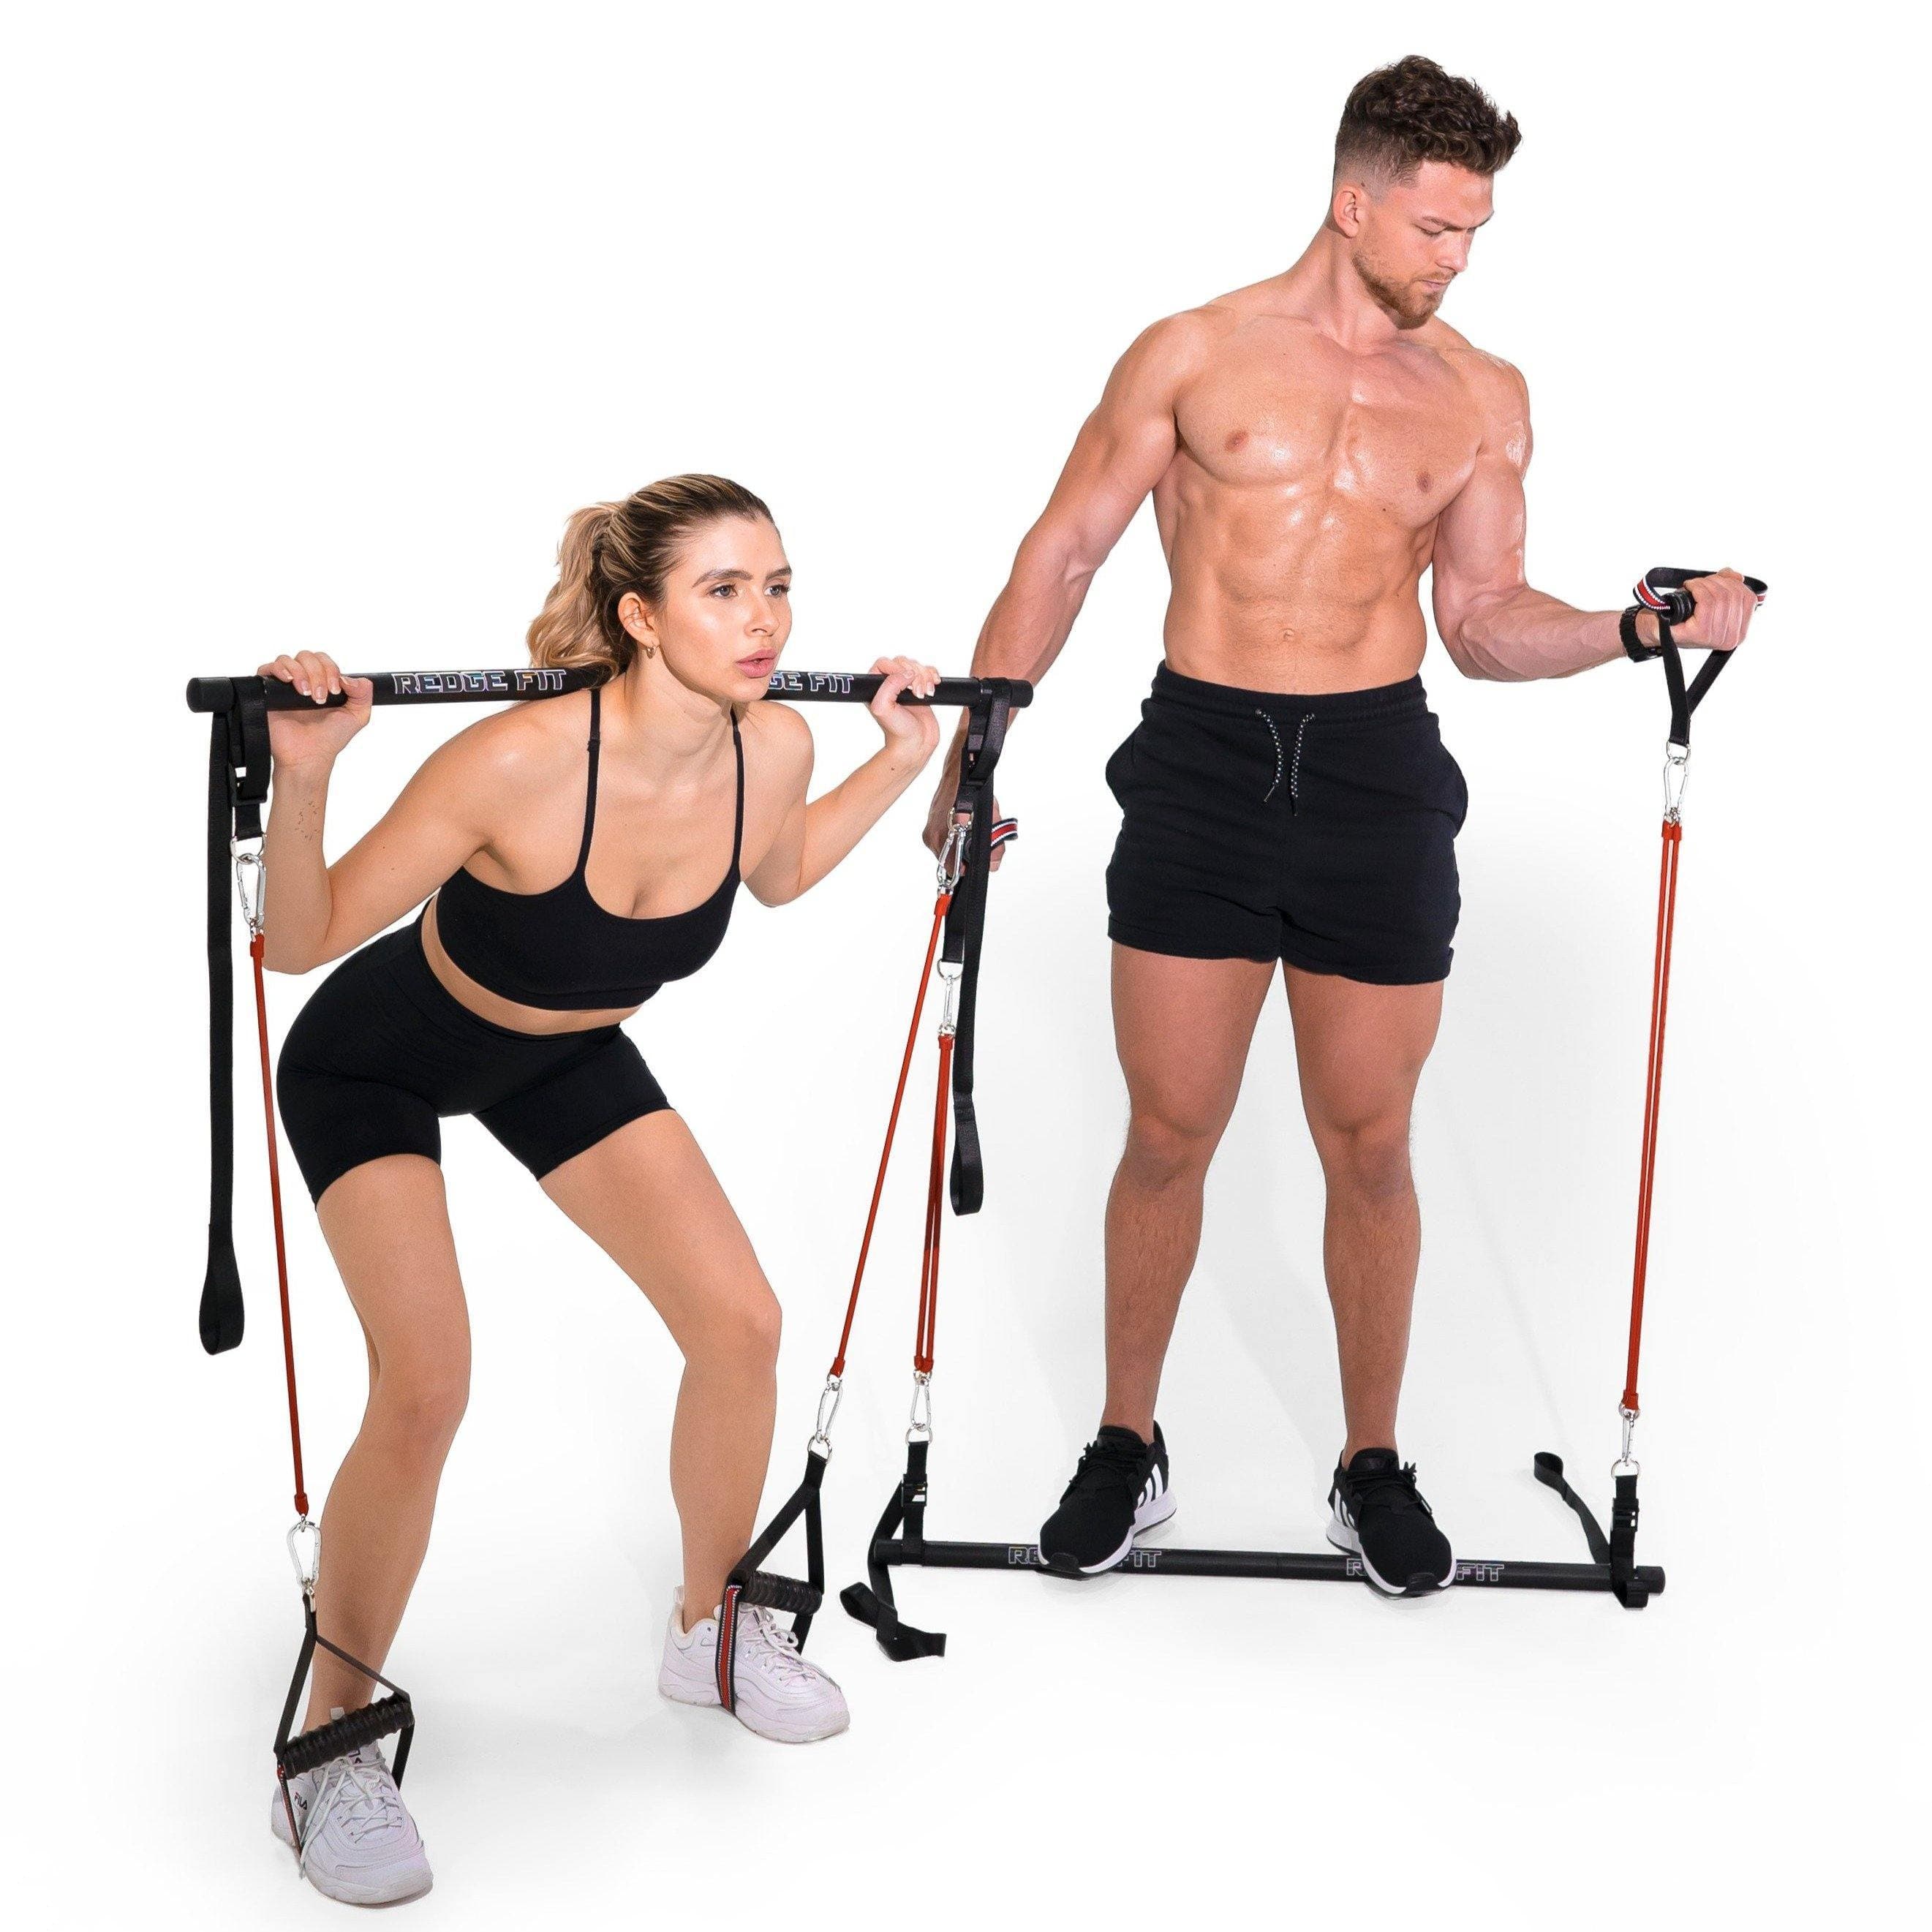 Man and Woman modeling the Redge Fit Home Gym Pro Pack Portable Gym Machine Available at https://www.getredge.com/products/home-gym-pro-pack